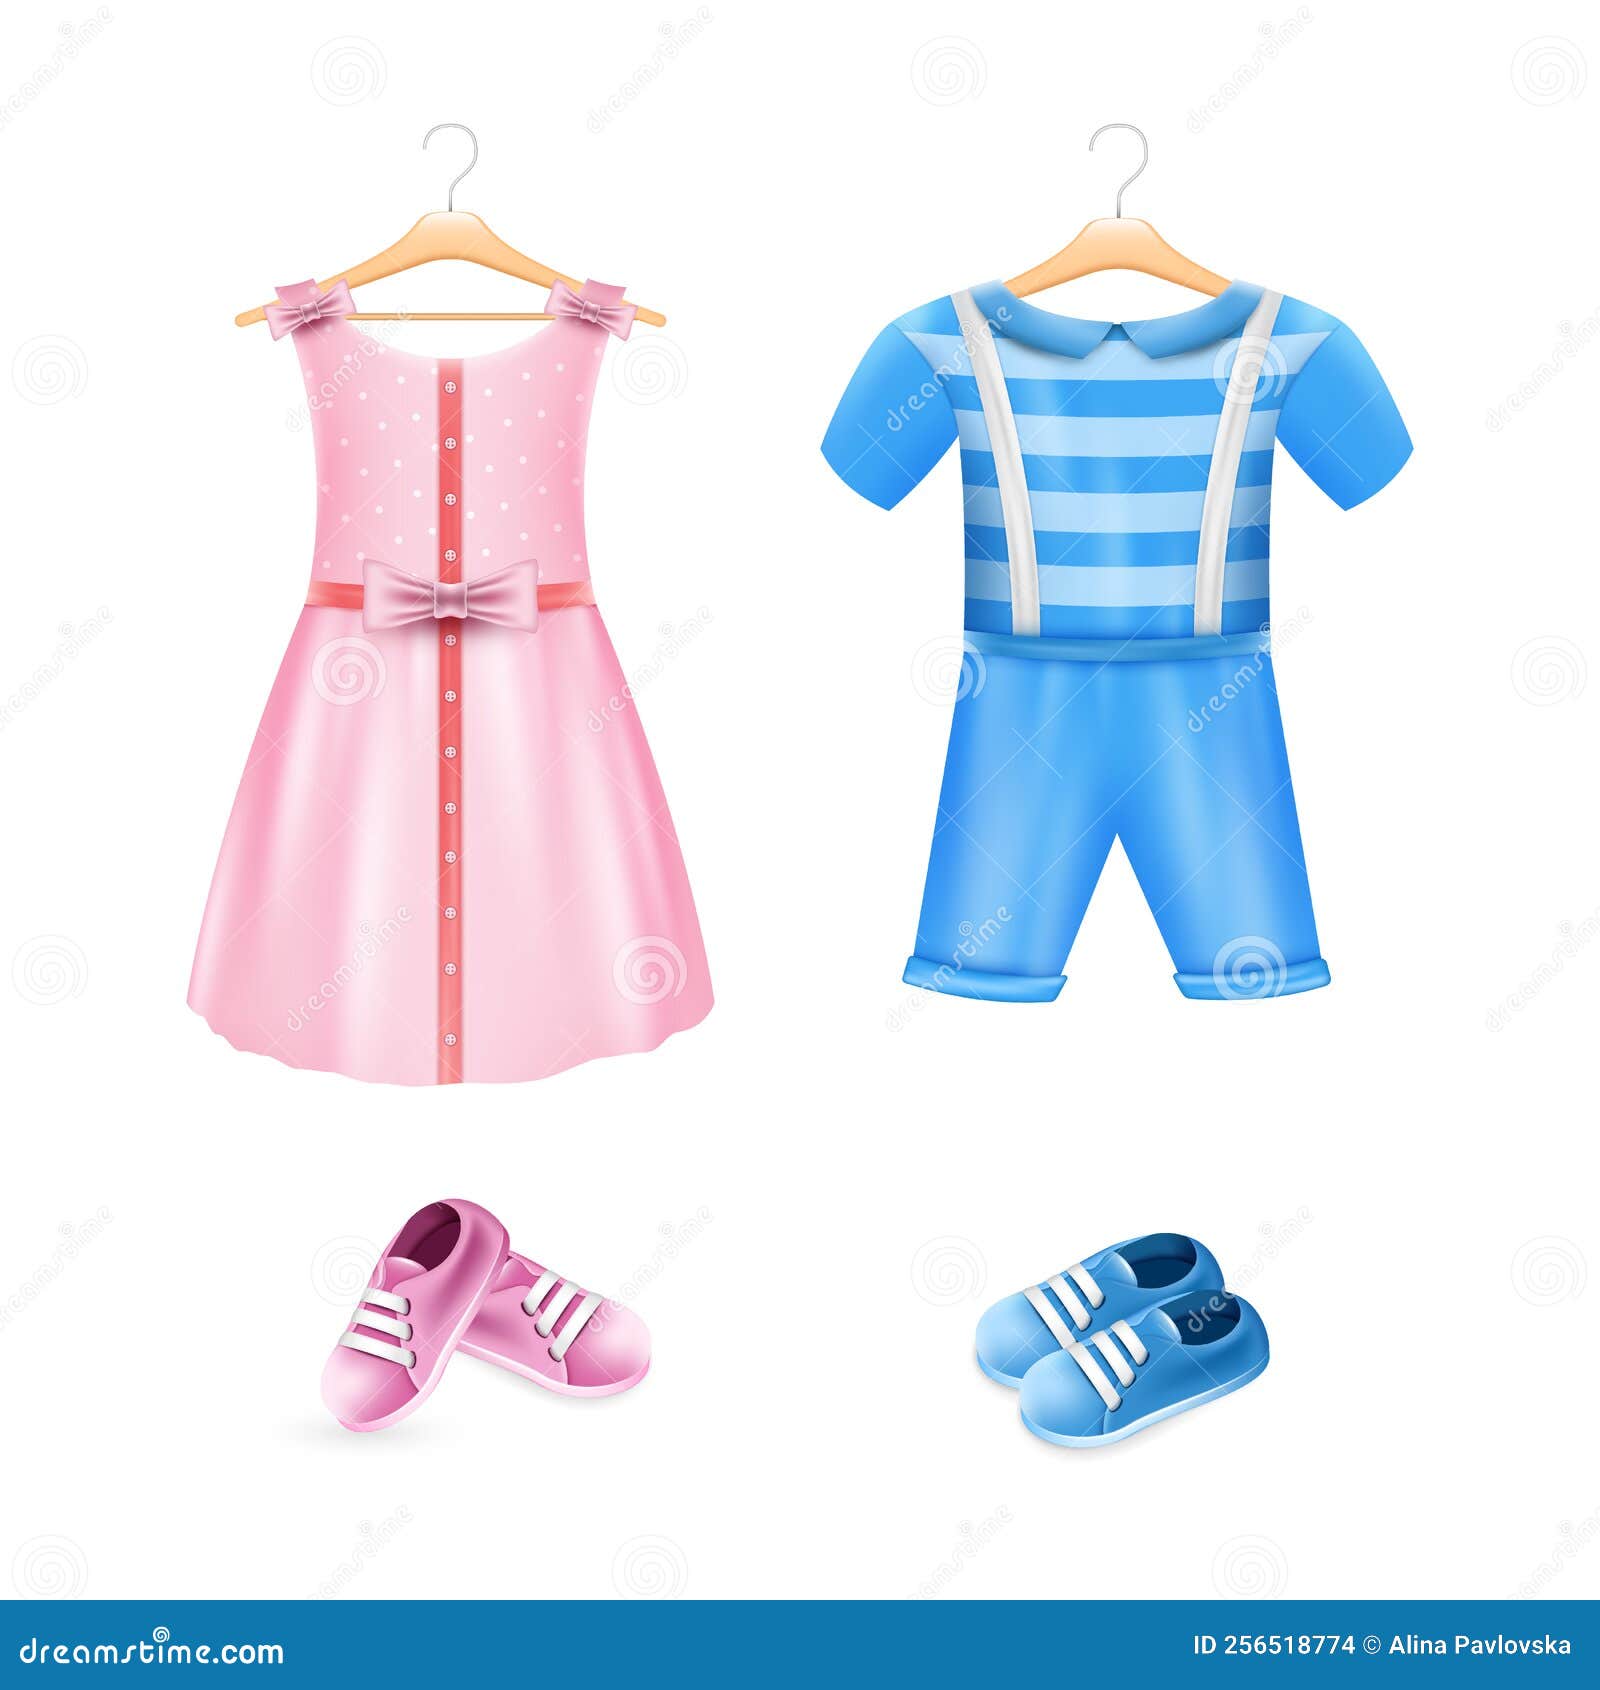 Clothes for Baby Boy and Girl. Realistic Pink Dress, Blue Romper and ...